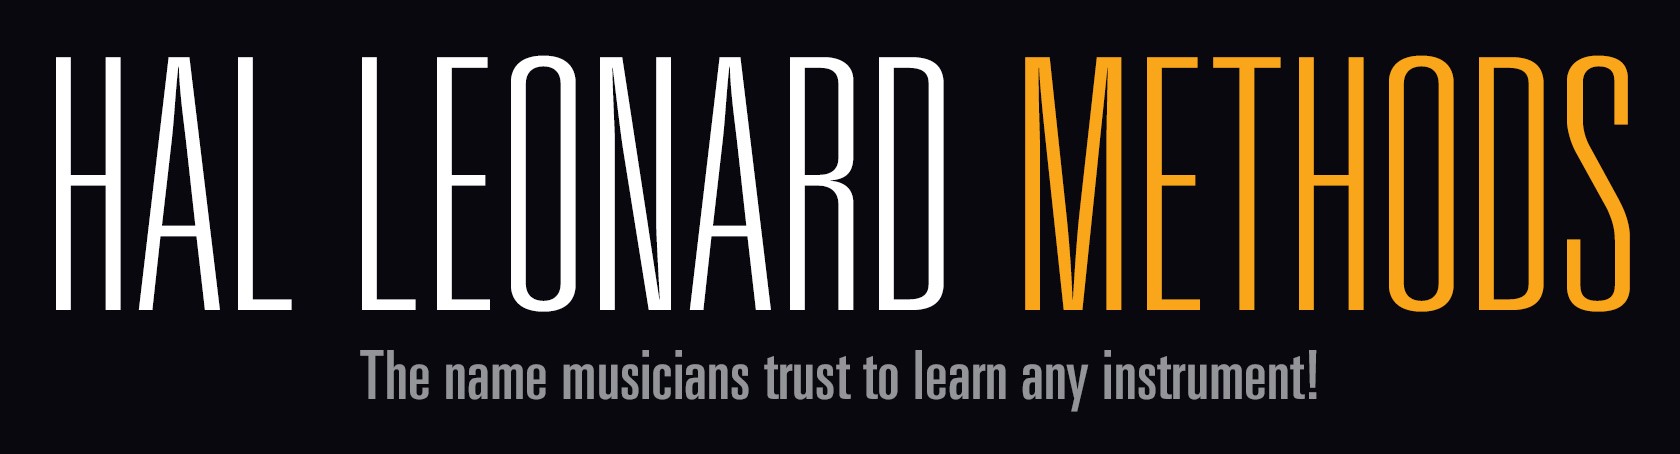 Hal Leonard Methods: The name musicians trust to learn any instrument!